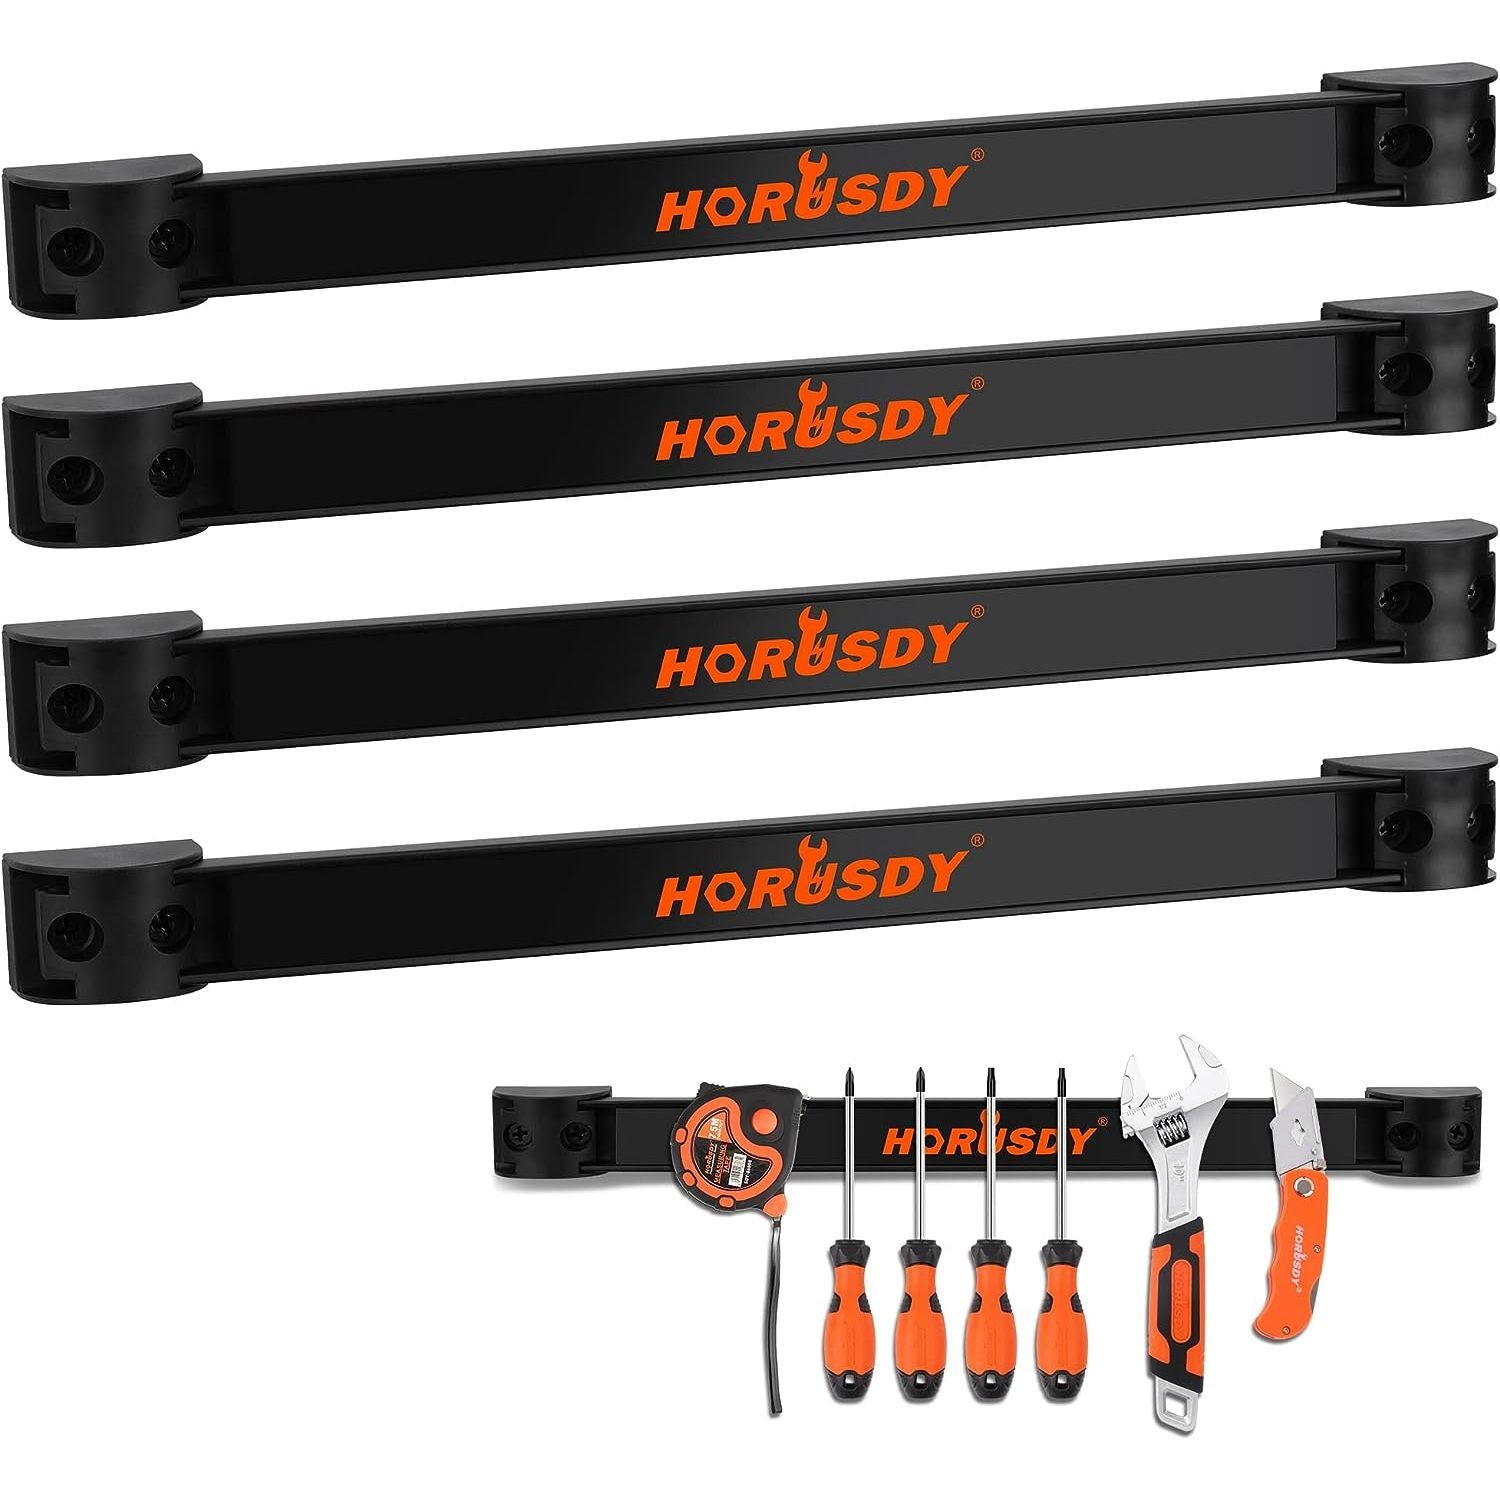 4 Pack Magnetic Tool Holder Strip - South East Clearance Centre